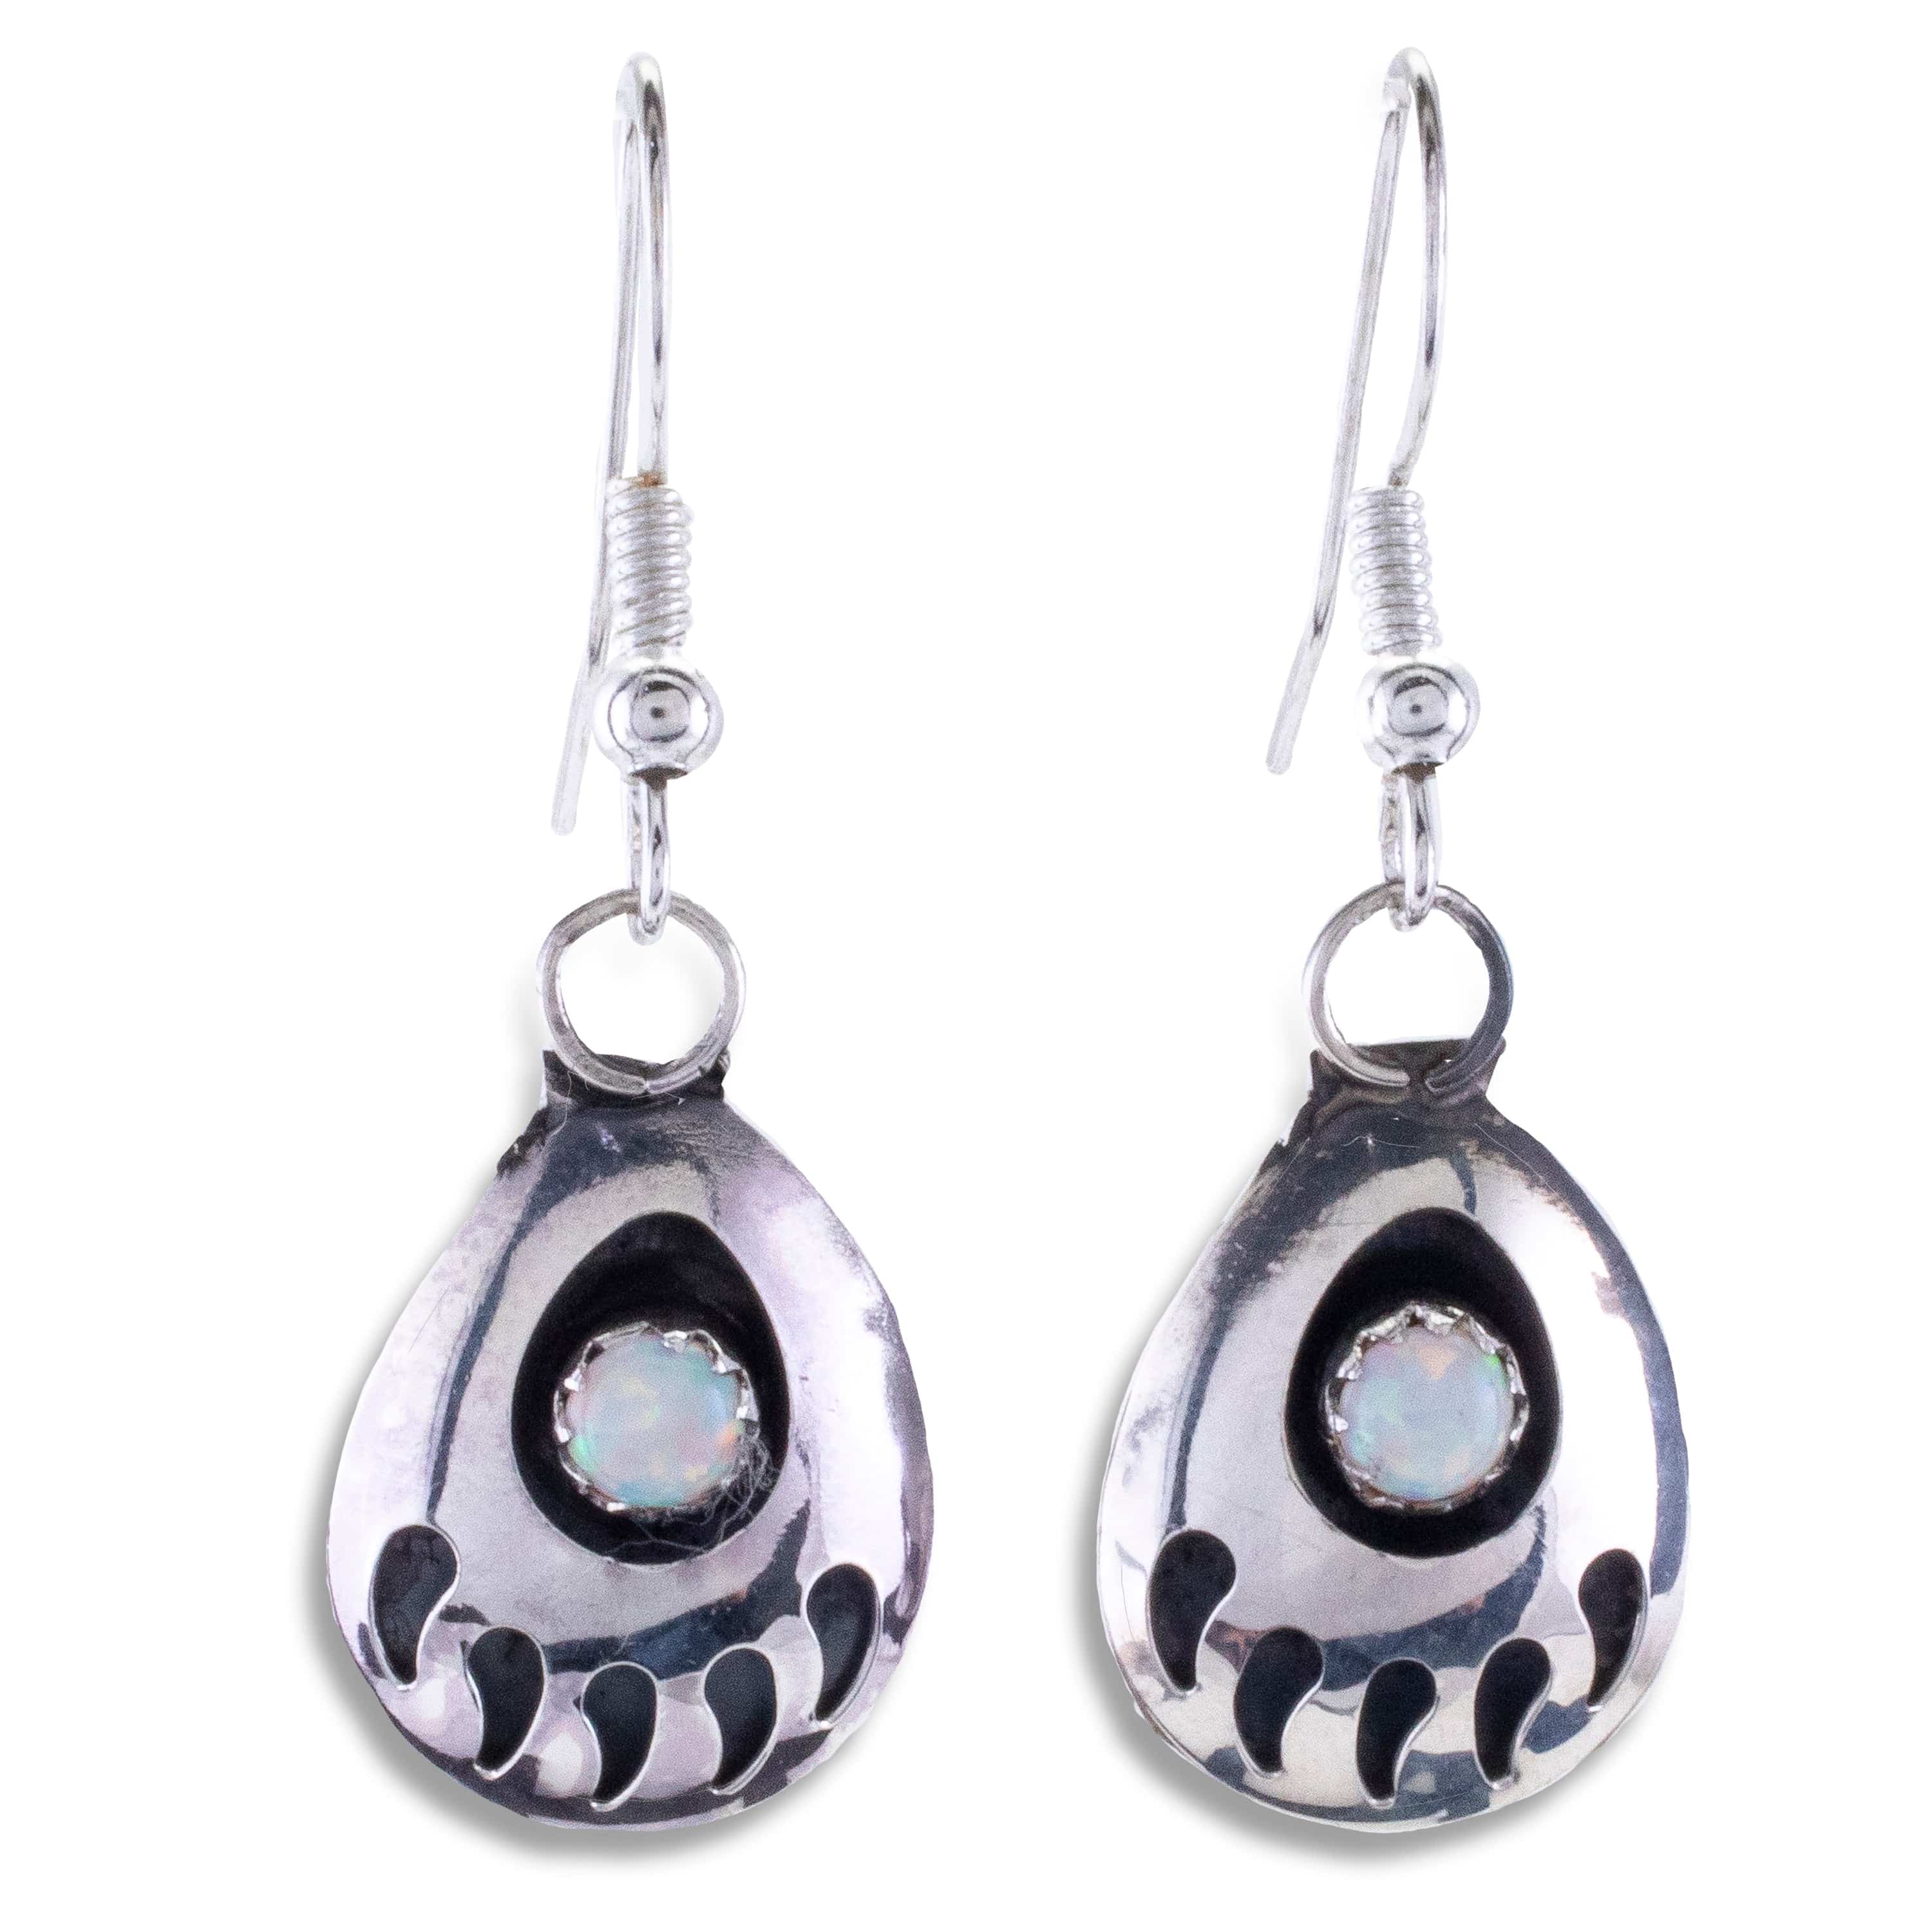 Kalifano Native American Jewelry Esther White Bear Claw with White Opal Inlay USA Native American Made 925 Sterling Silver Dangly Earrings NAE80.006